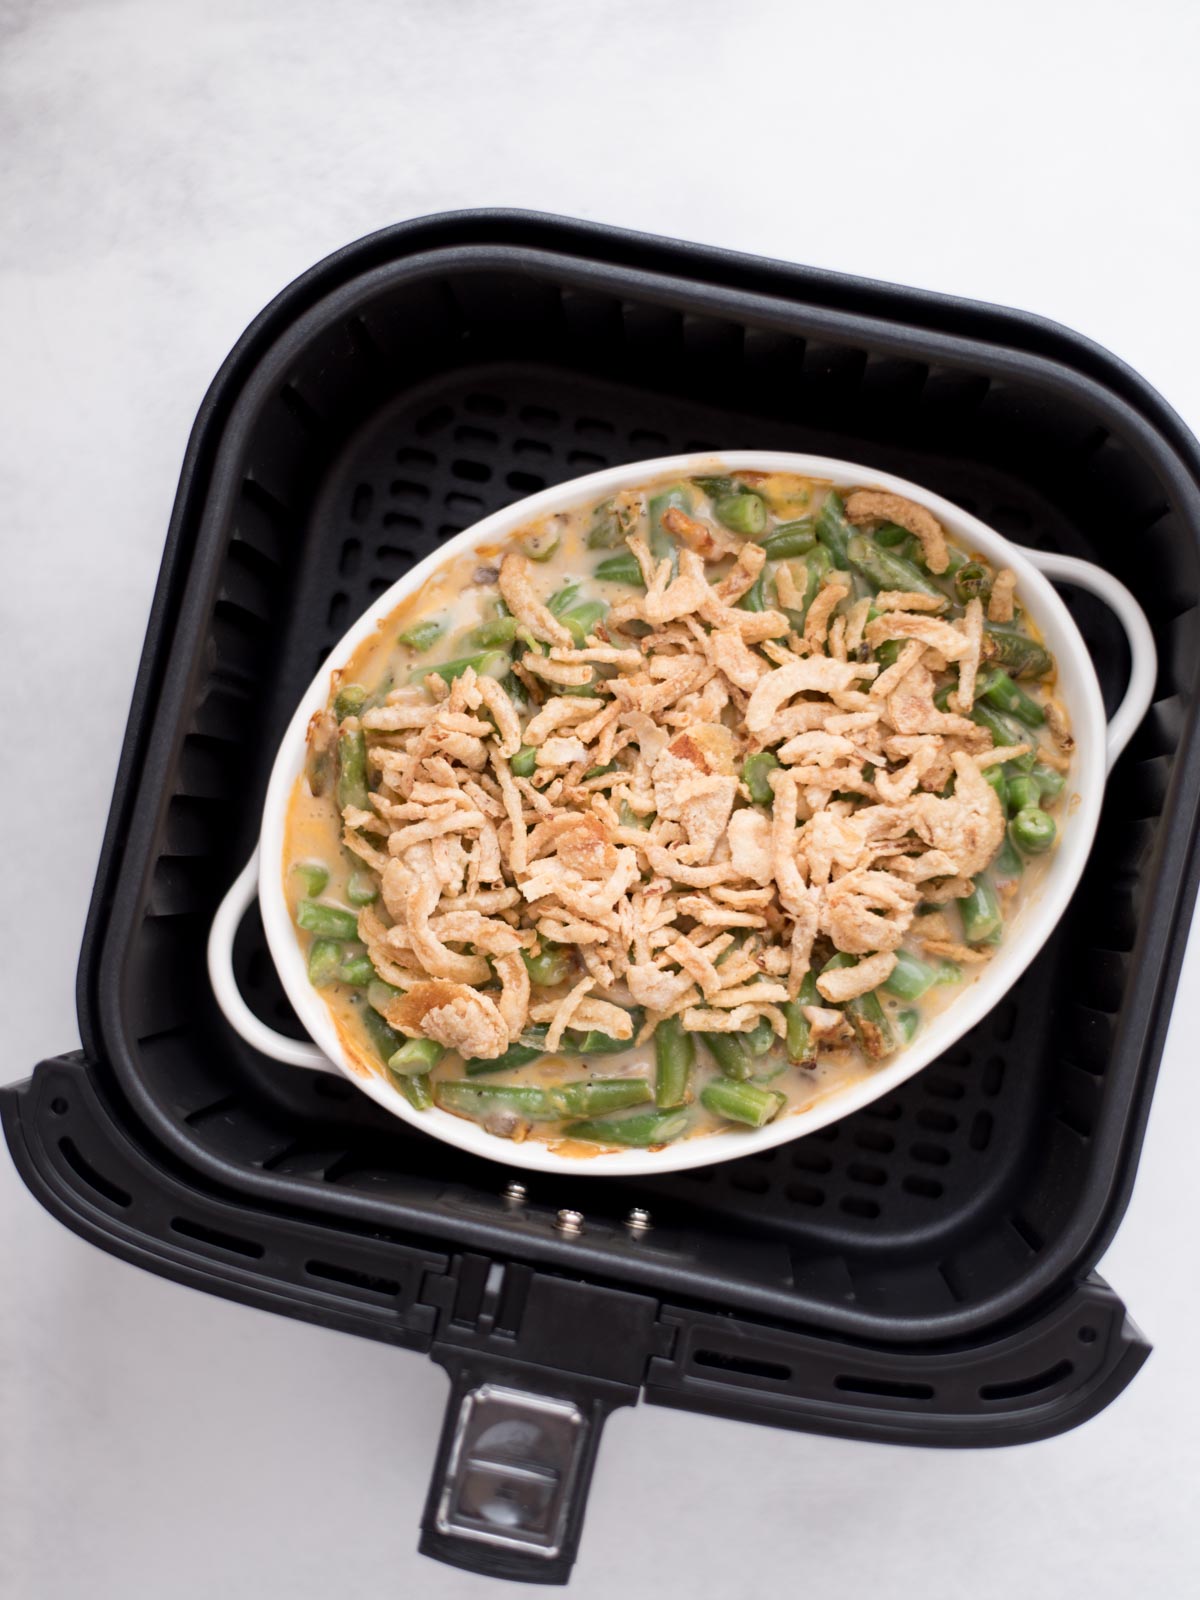 French's fried onions topped over the green bean casserole in the air fryer bucket.